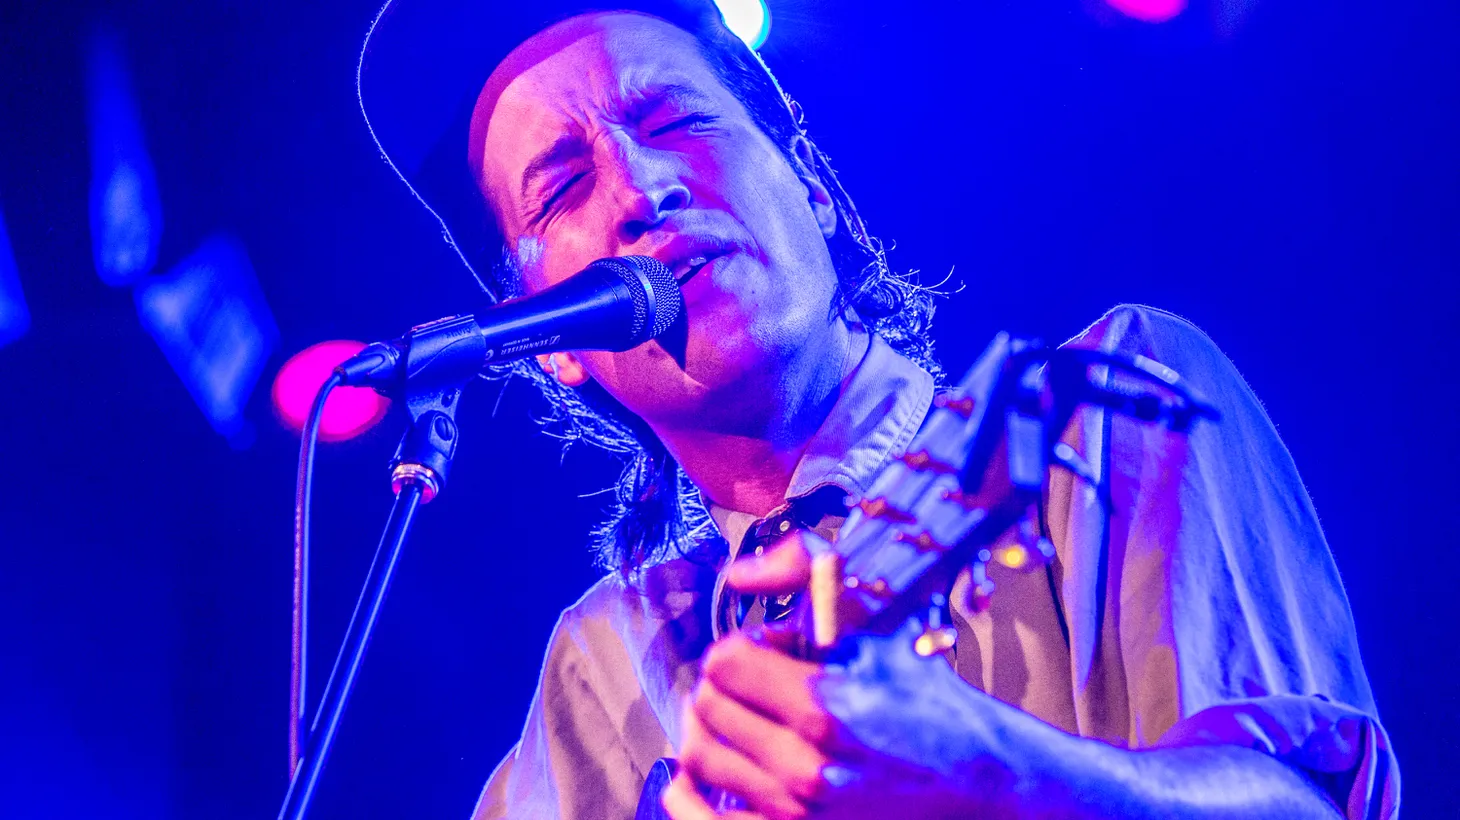 Marlon Williams blew us away with his performance at SXSW this year.